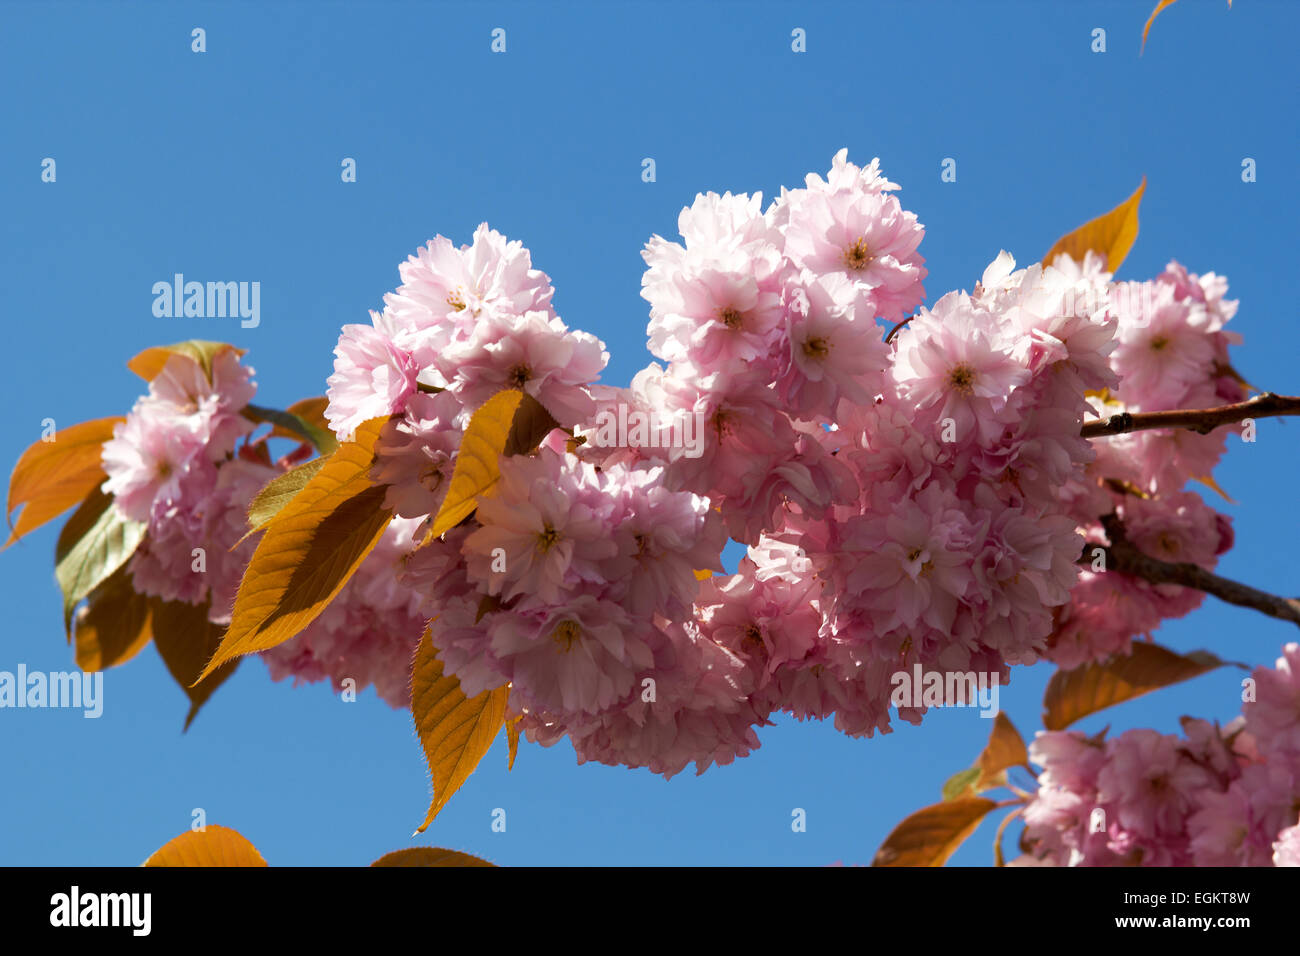 Blooming tree in spring with pink flowers closeup Stock Photo